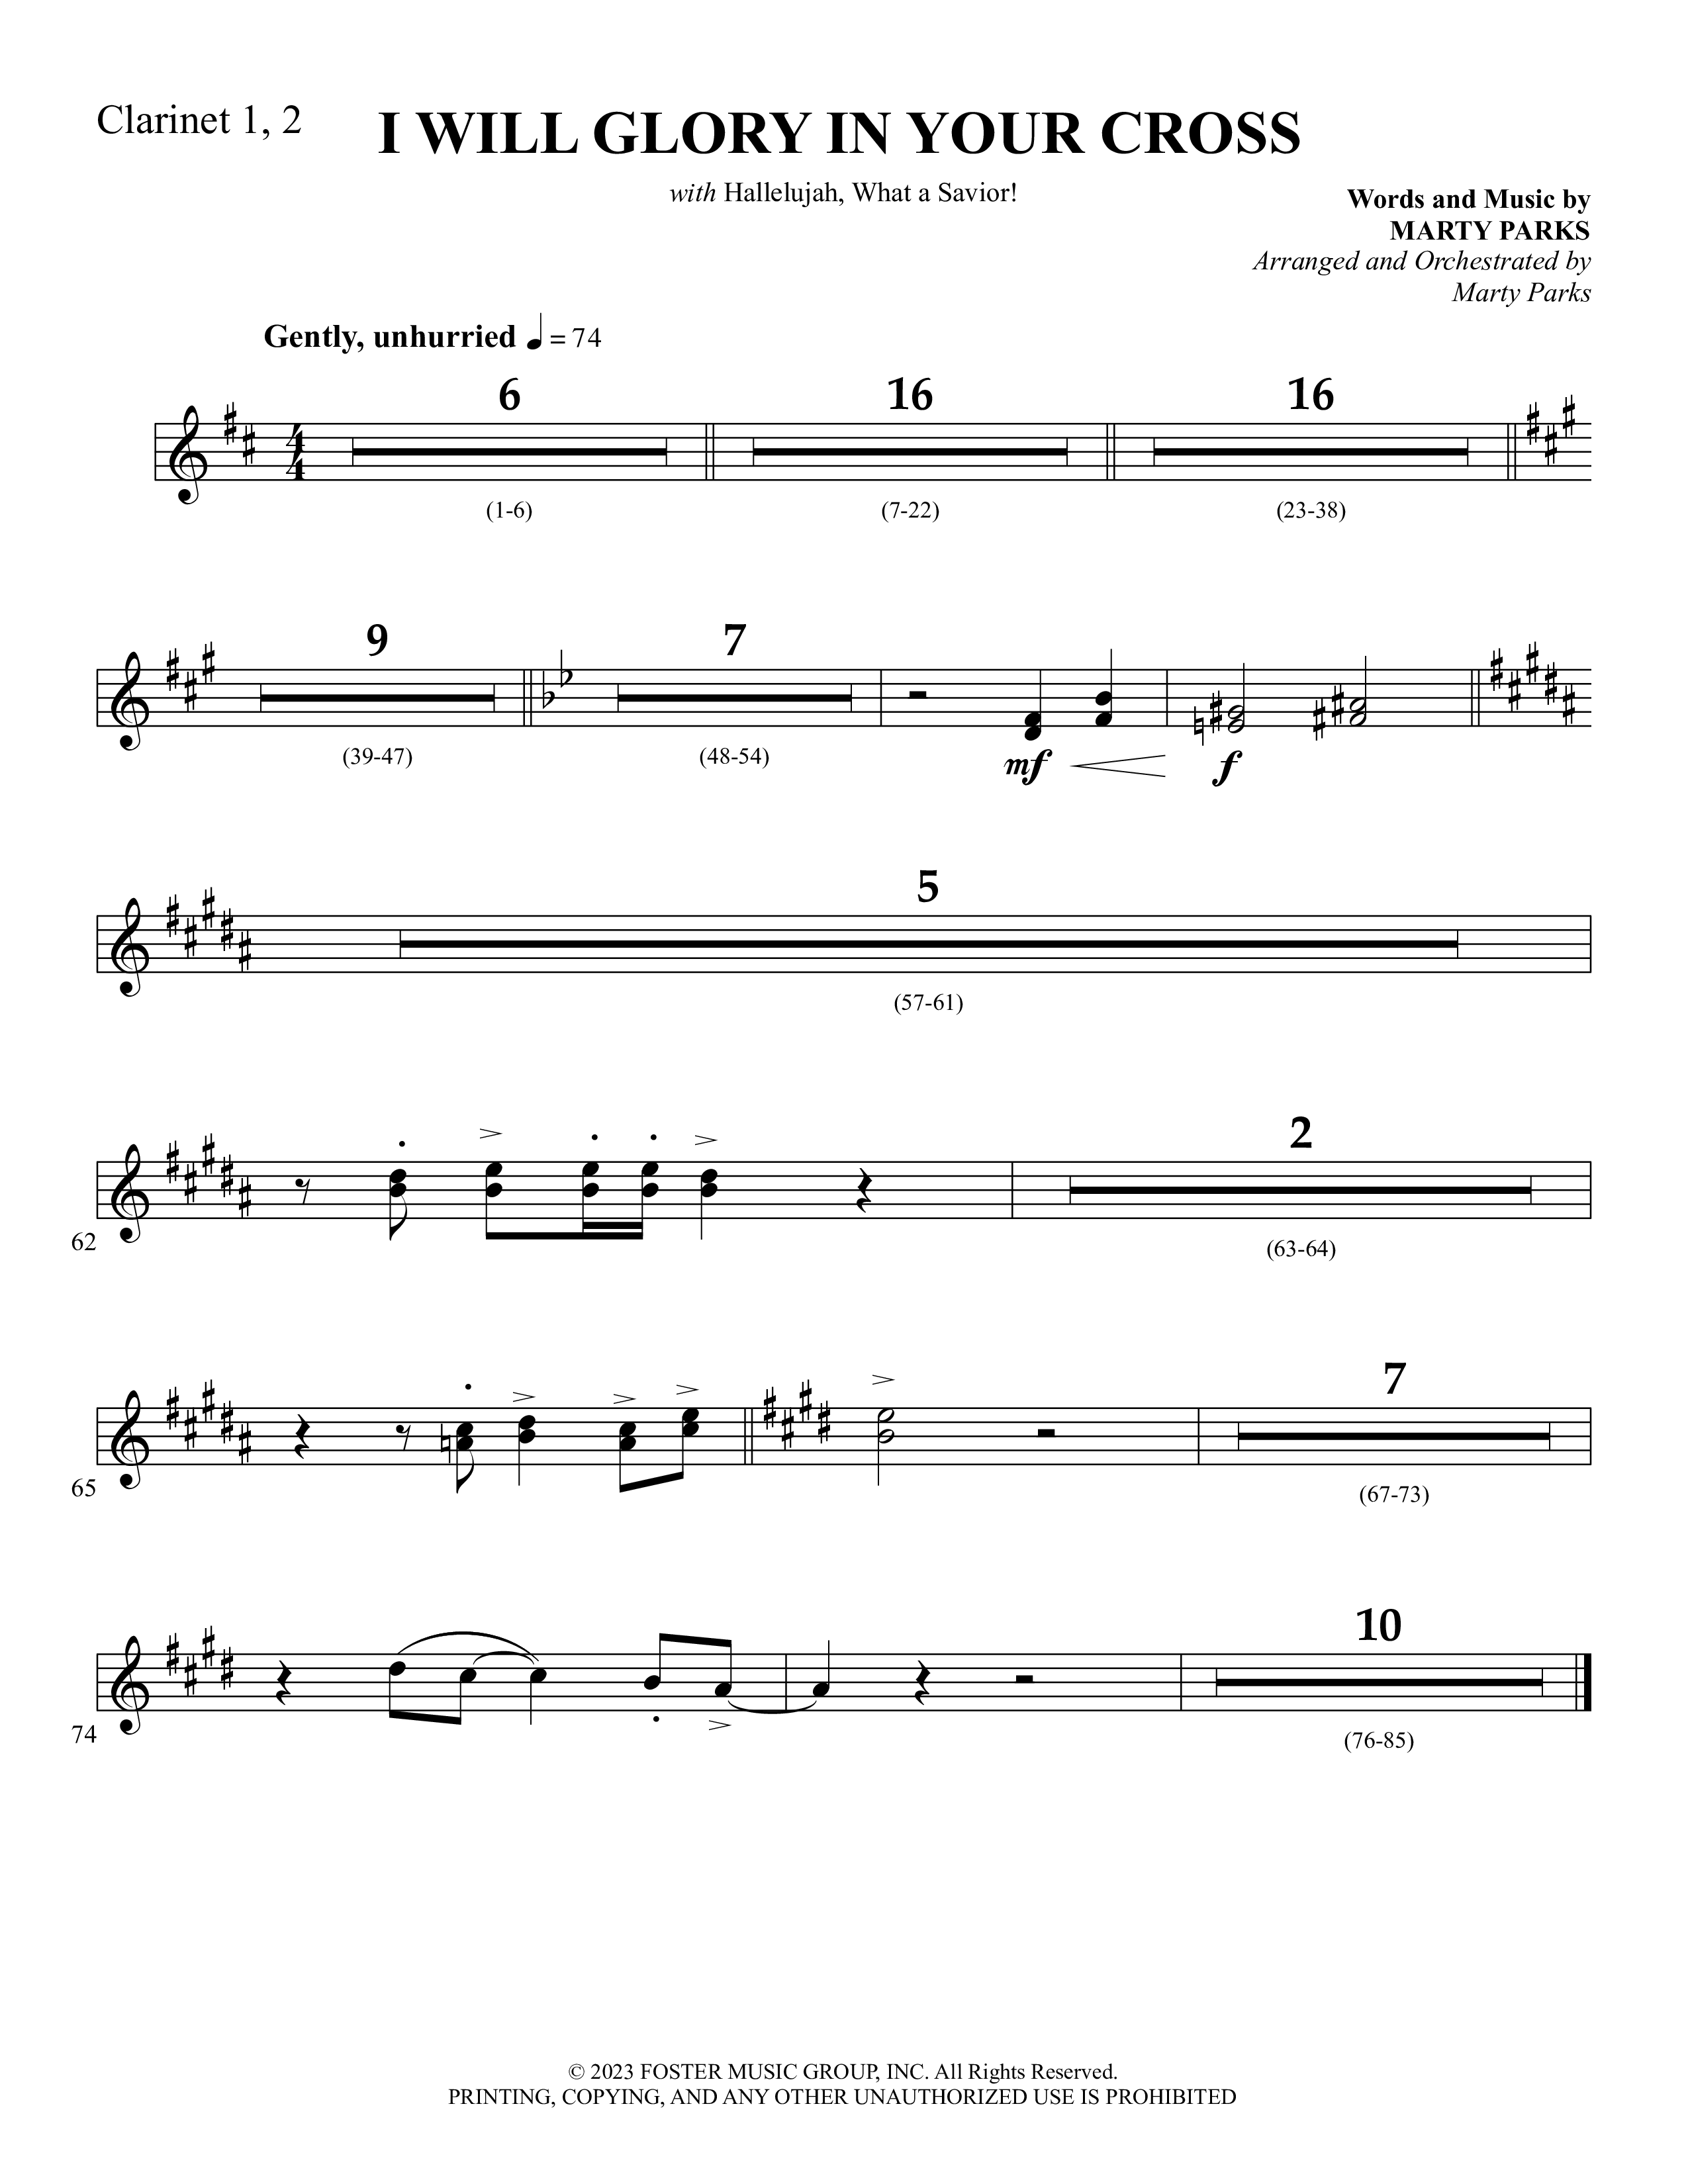 I Will Glory In Your Cross (with Hallelujah What A Savior) Clarinet 1/2 (Foster Music Group / Arr. Marty Parks)